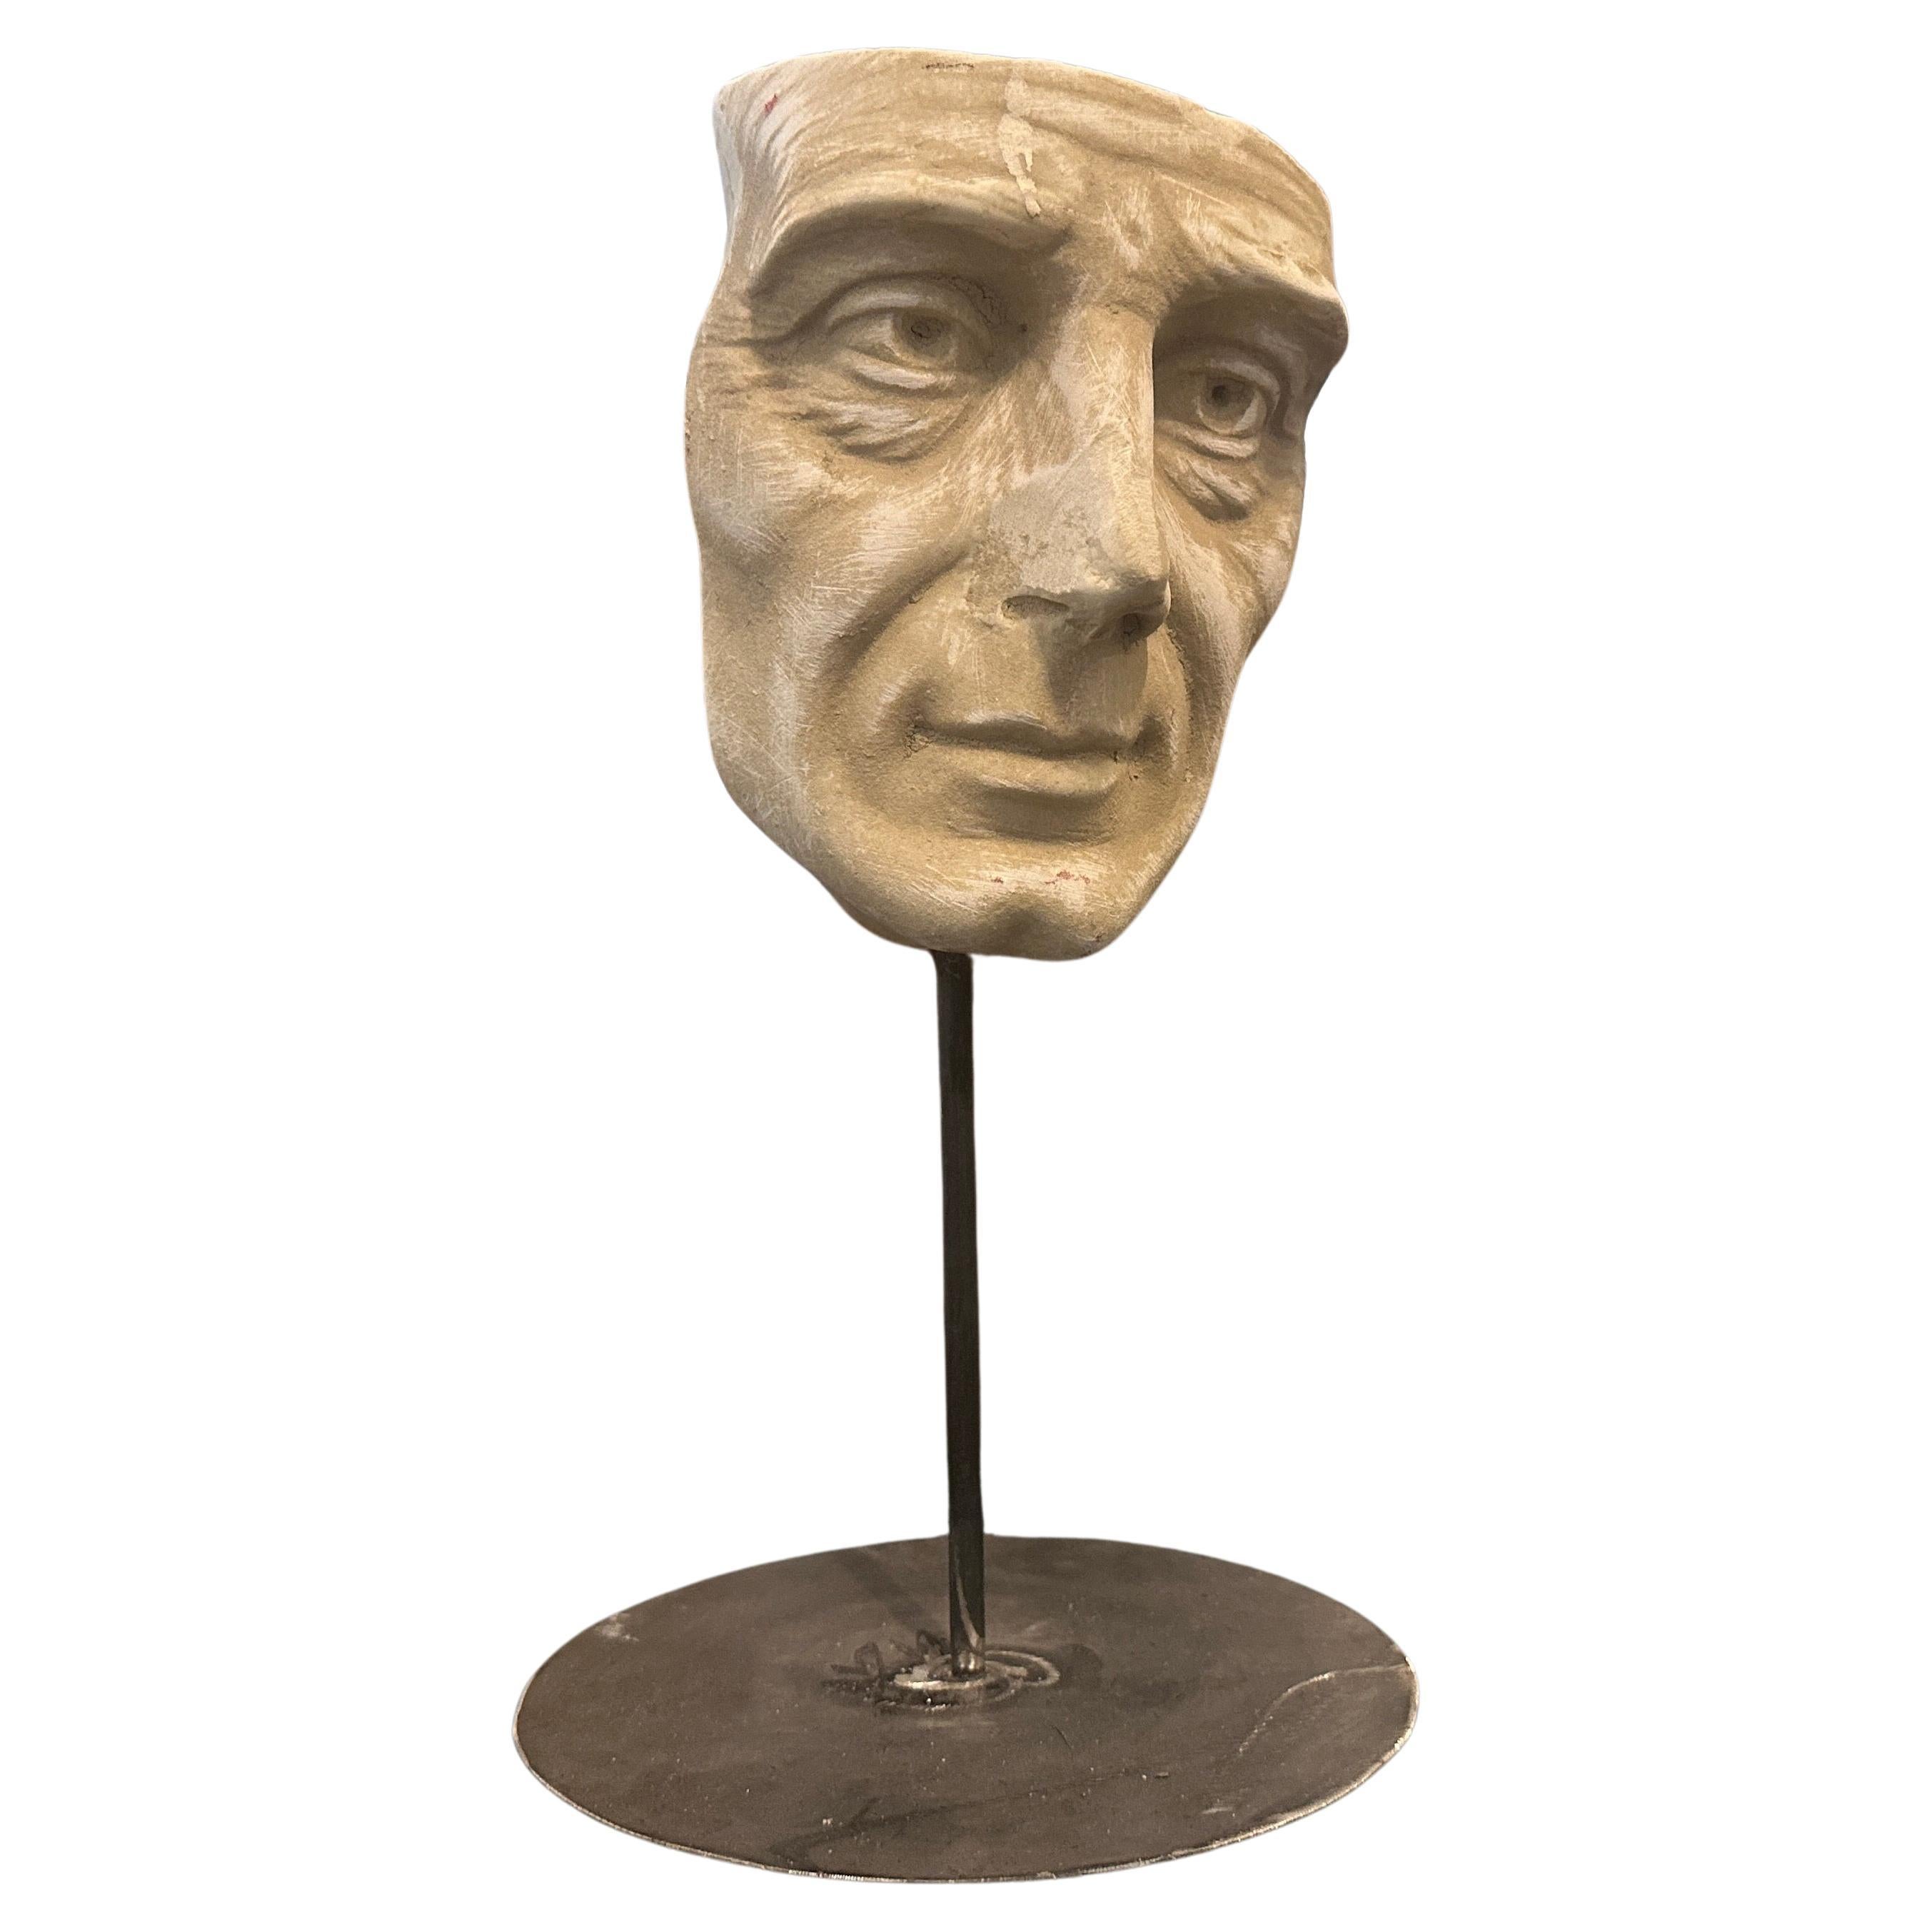 This marble man's head is a testament to the Neoclassical style, which drew inspiration from classical Greek and Roman art. The sculpture depicts a male figure with refined features, capturing the essence of idealized beauty and classical